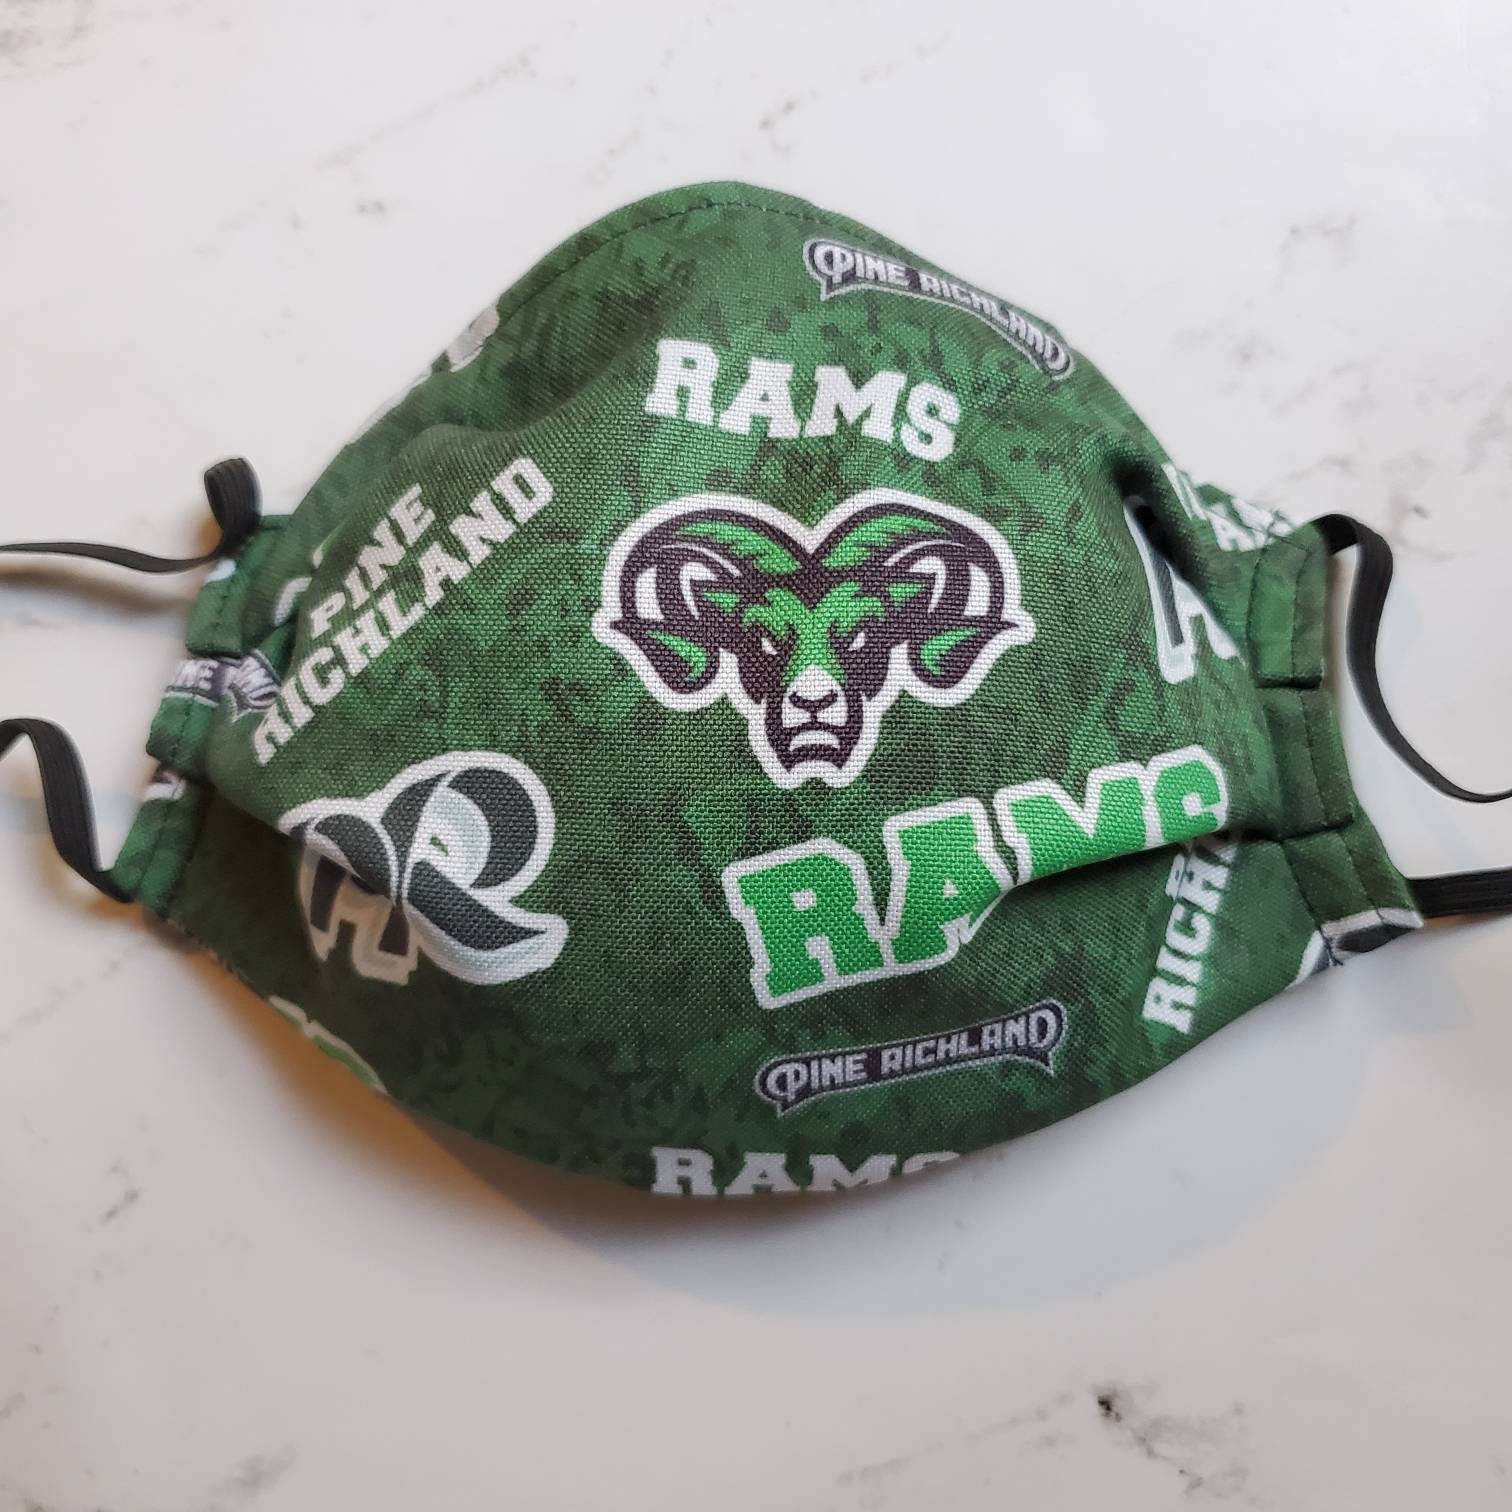 Pine Richland Rams Green Logo Print Face Mask - Surgical Style With Nose Wire Awesome Mask Pr Adjustable Elastic Straps